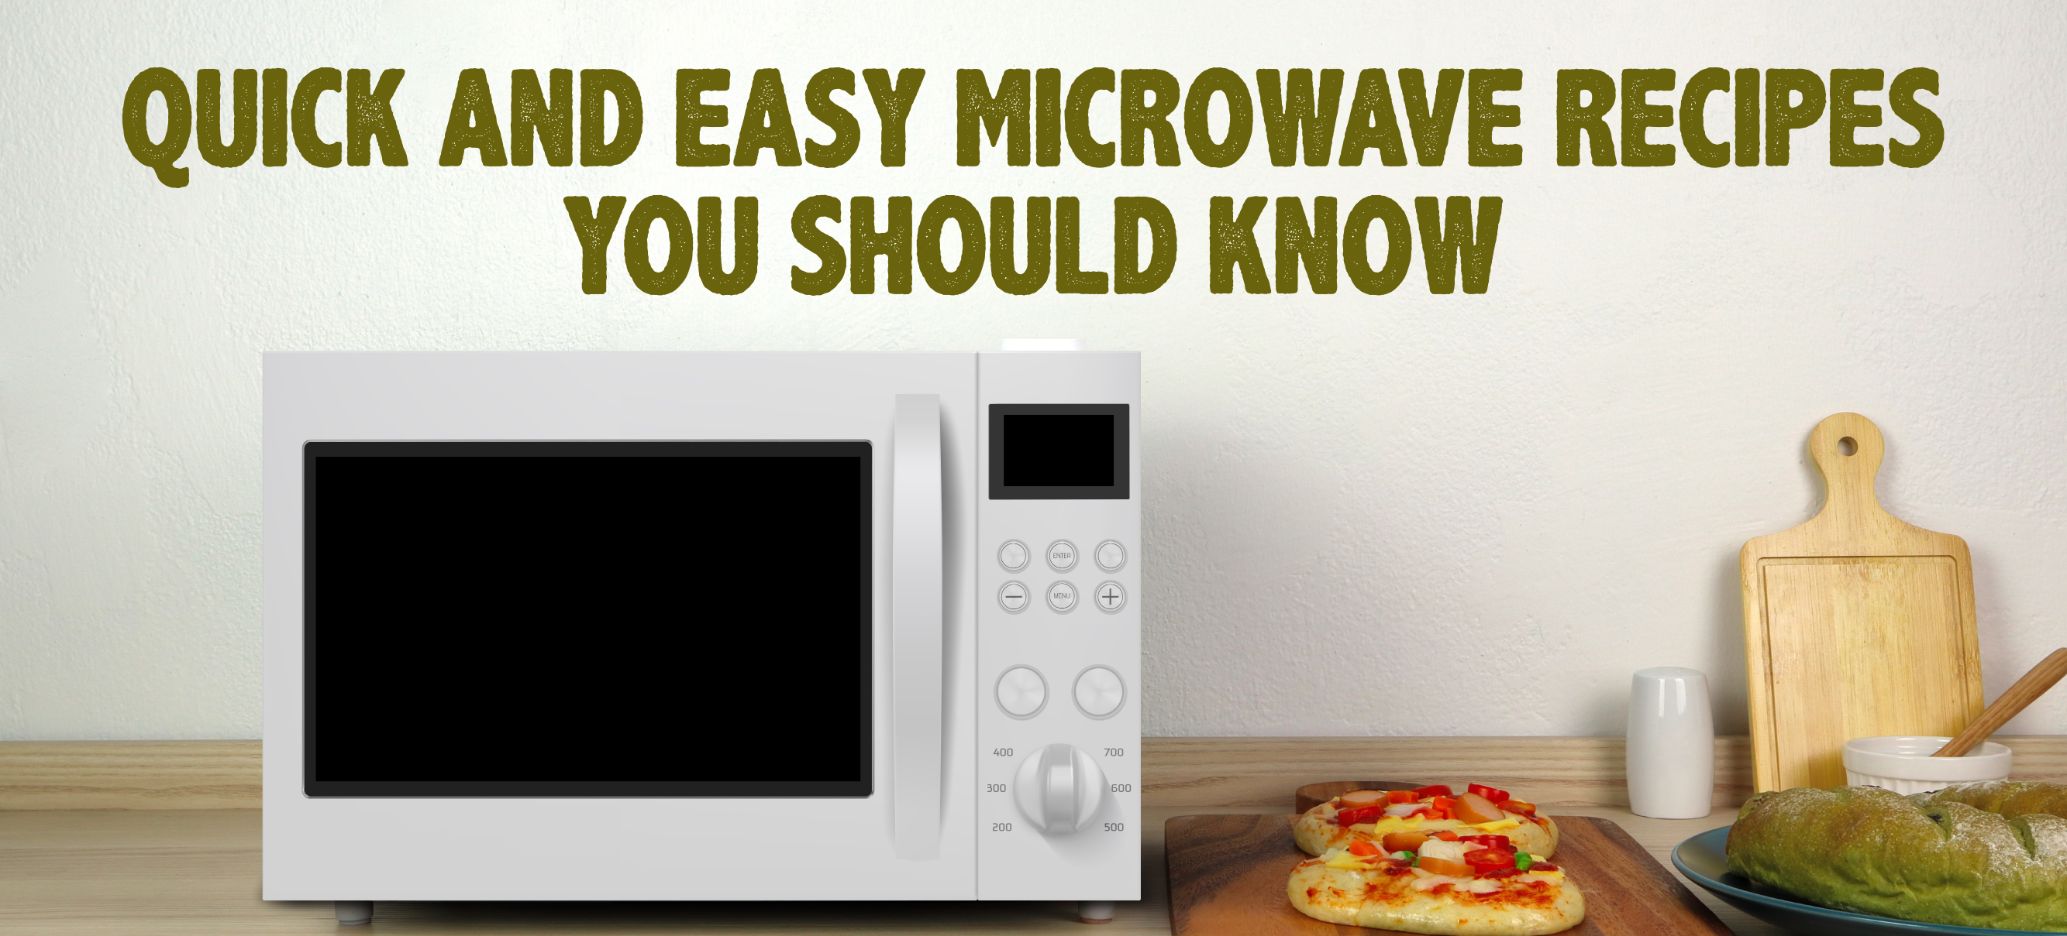 Quick And Easy Microwave Recipes You Should Know